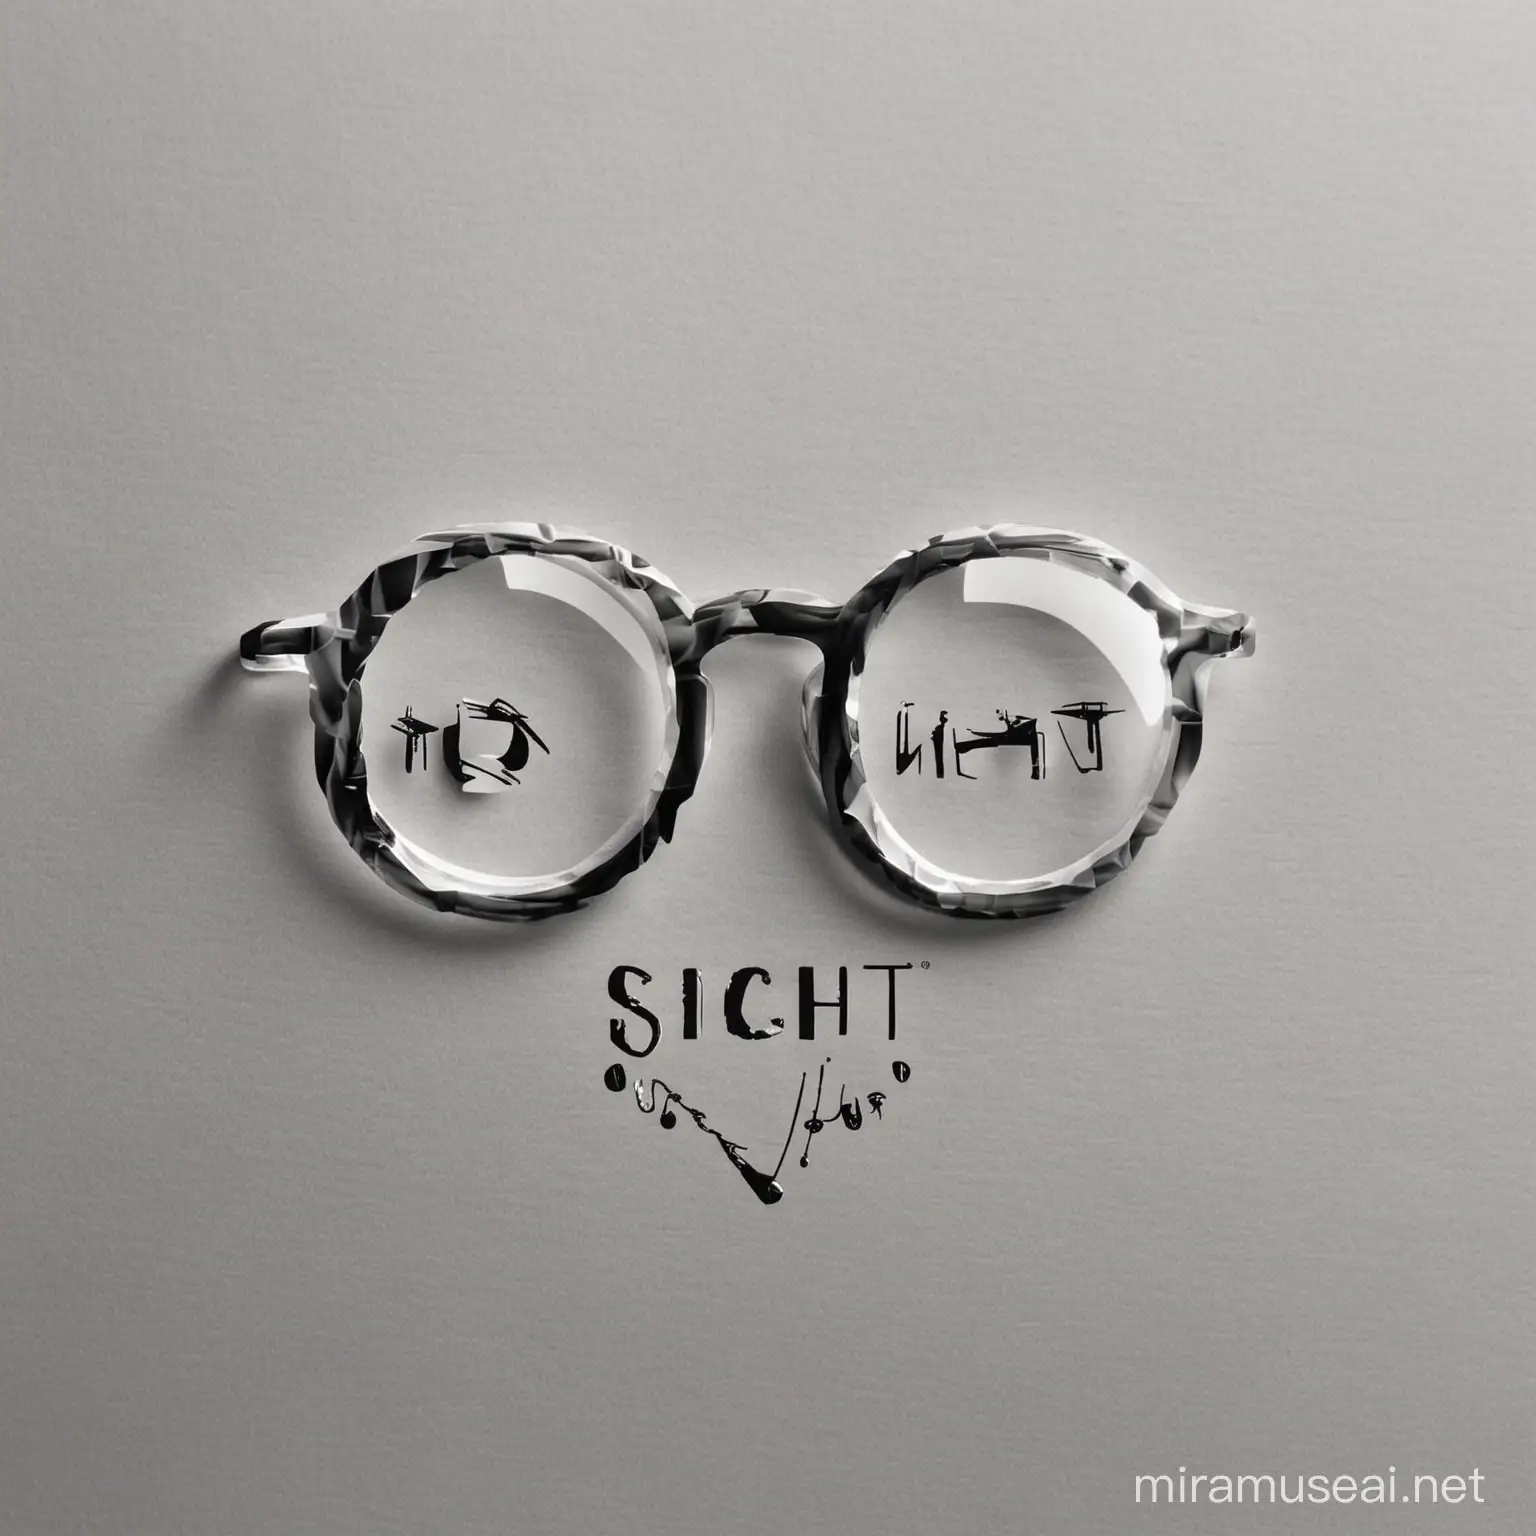 Logo for a store selling glasses "Sight"